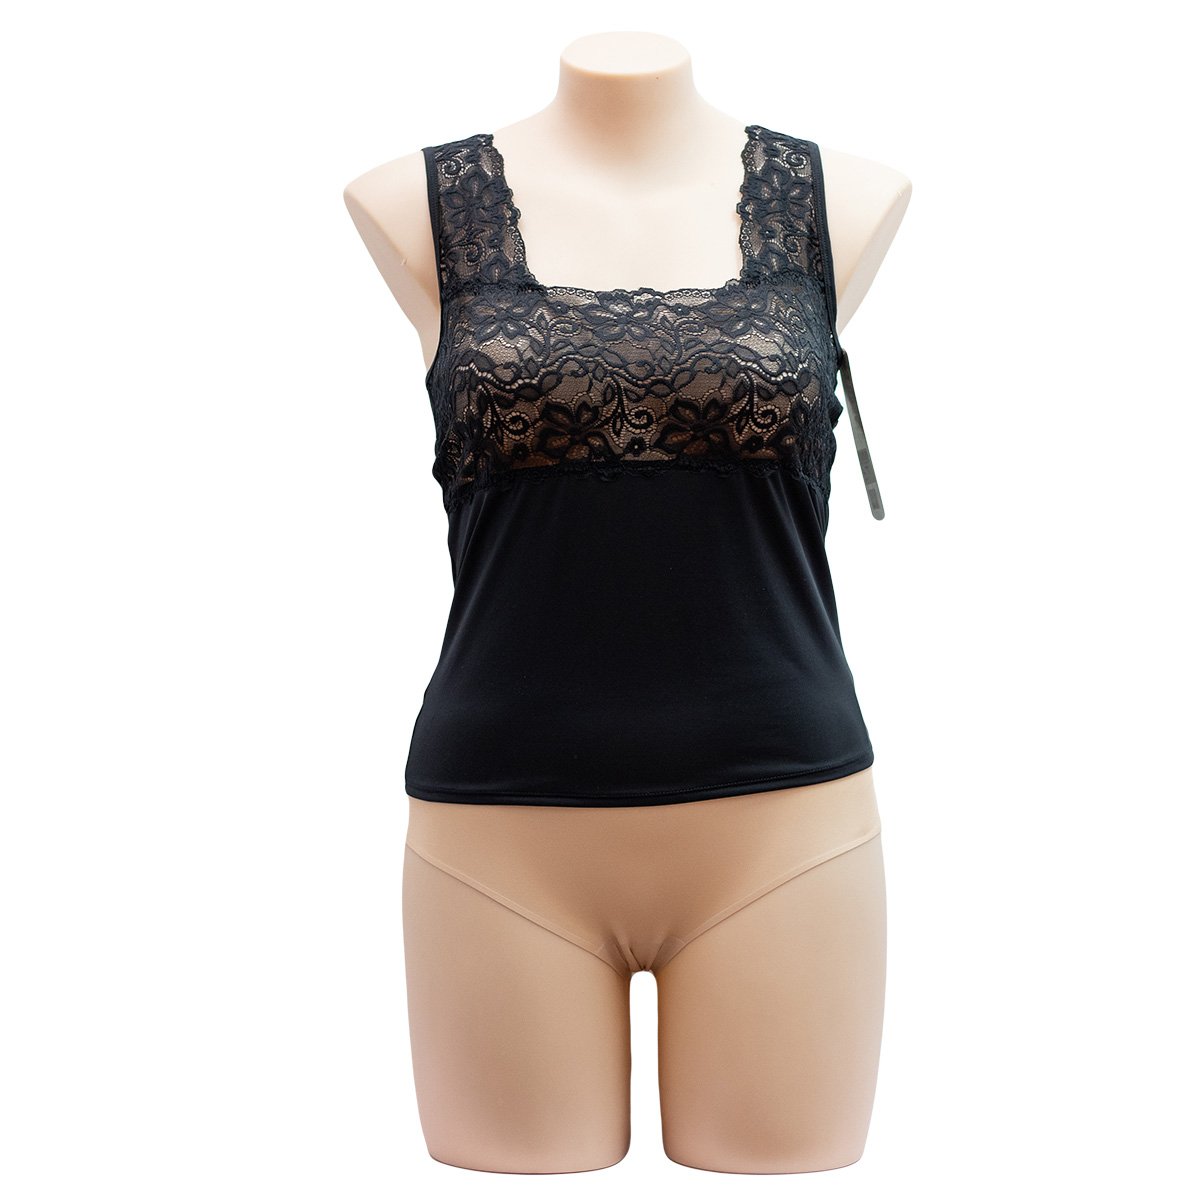 Essence Square Neck Camisole 678S - Singlets & Tanks Black / 10 / S  Available at Illusions Lingerie